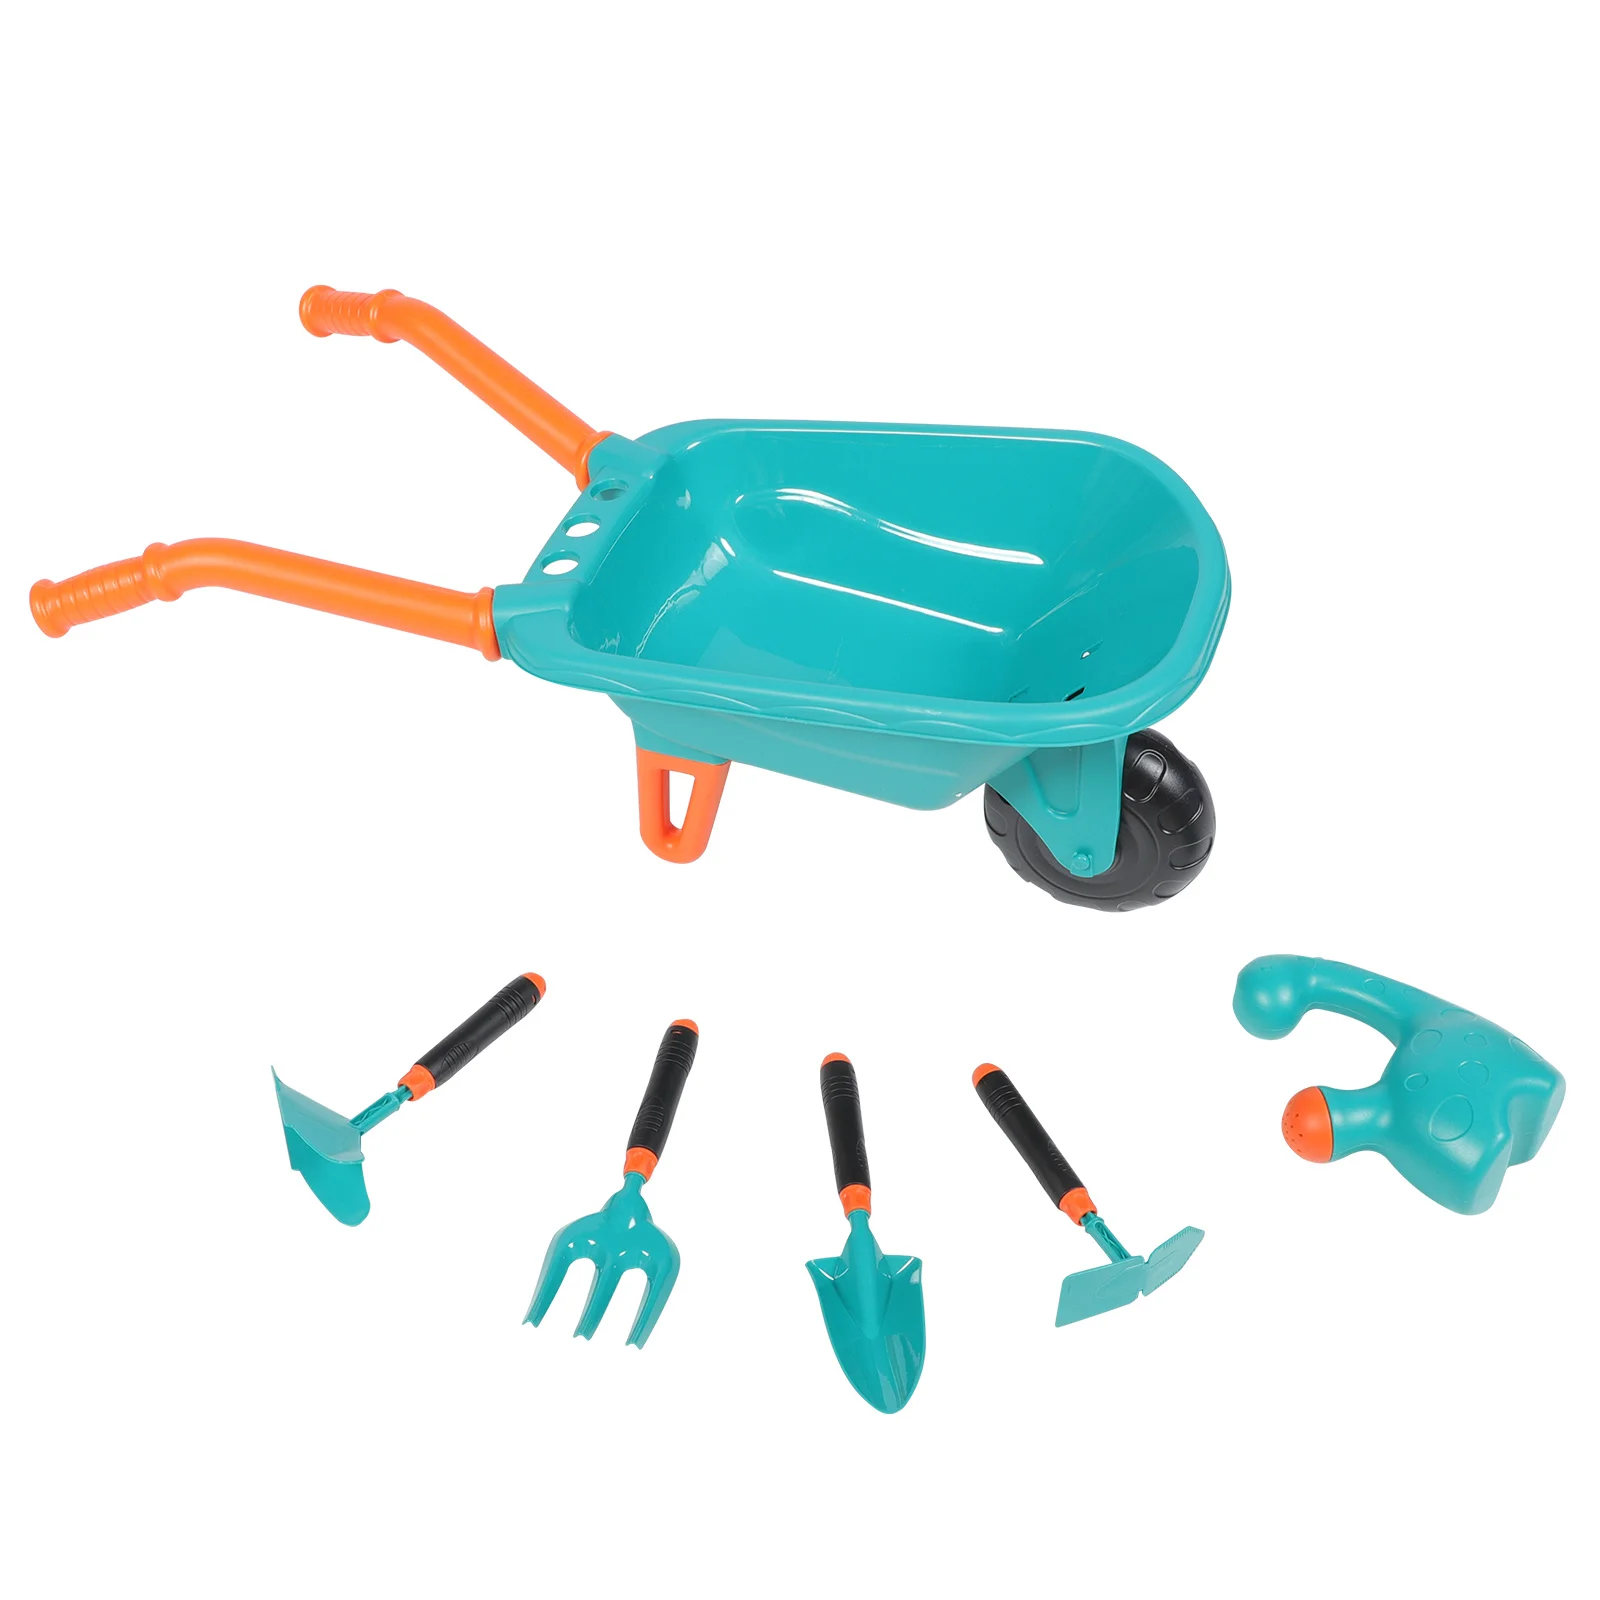 

Children's Toy Set Gardening Tools Kids Outdoor Planting Plaything Toys Toddlers Wheelbarrow For